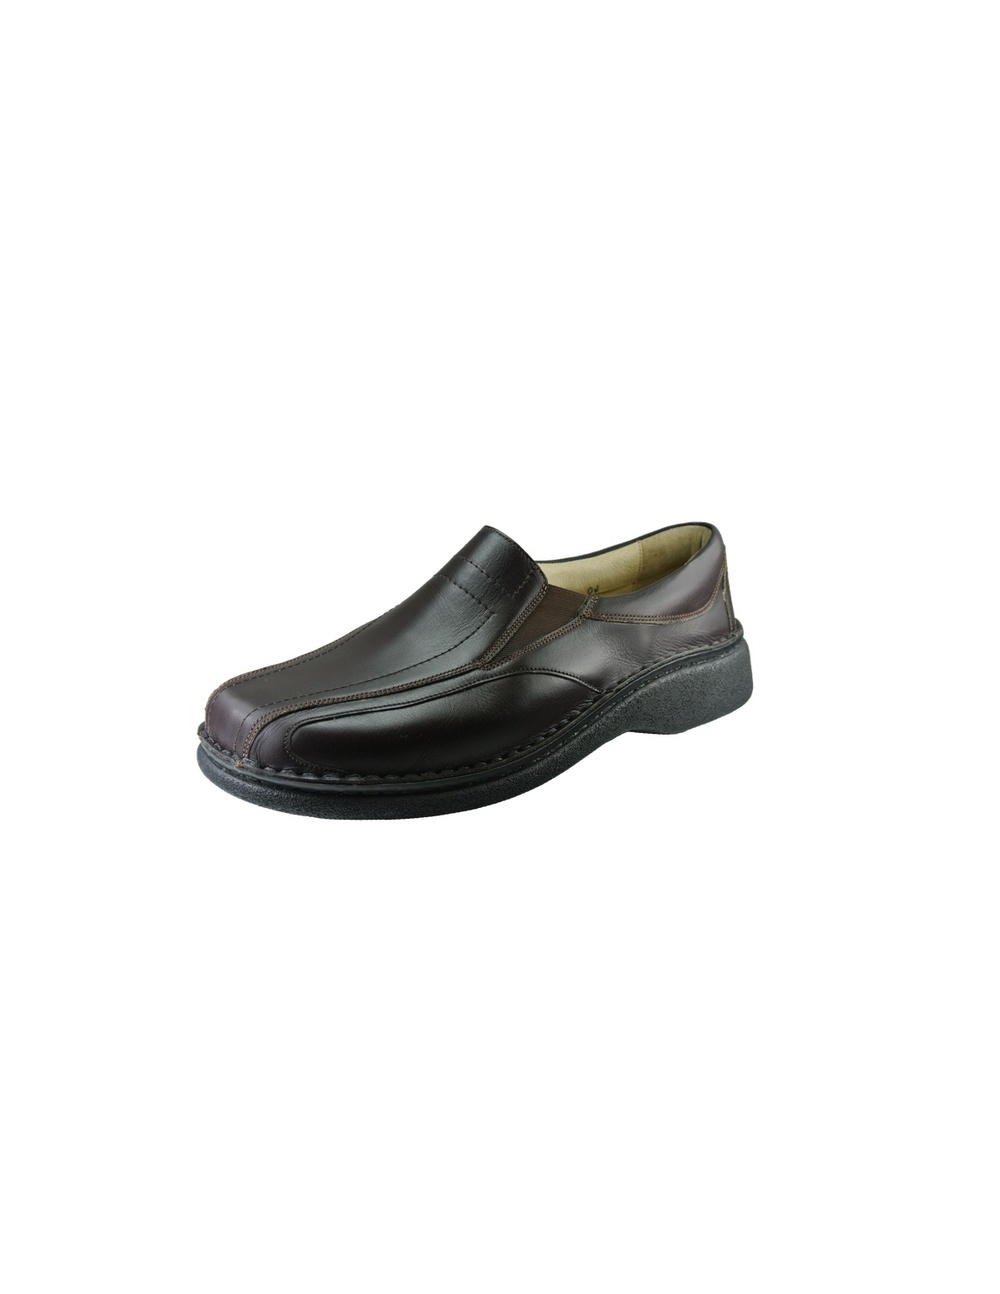 UniStyle Footwear Inc | Products | Style 602 | Style 602